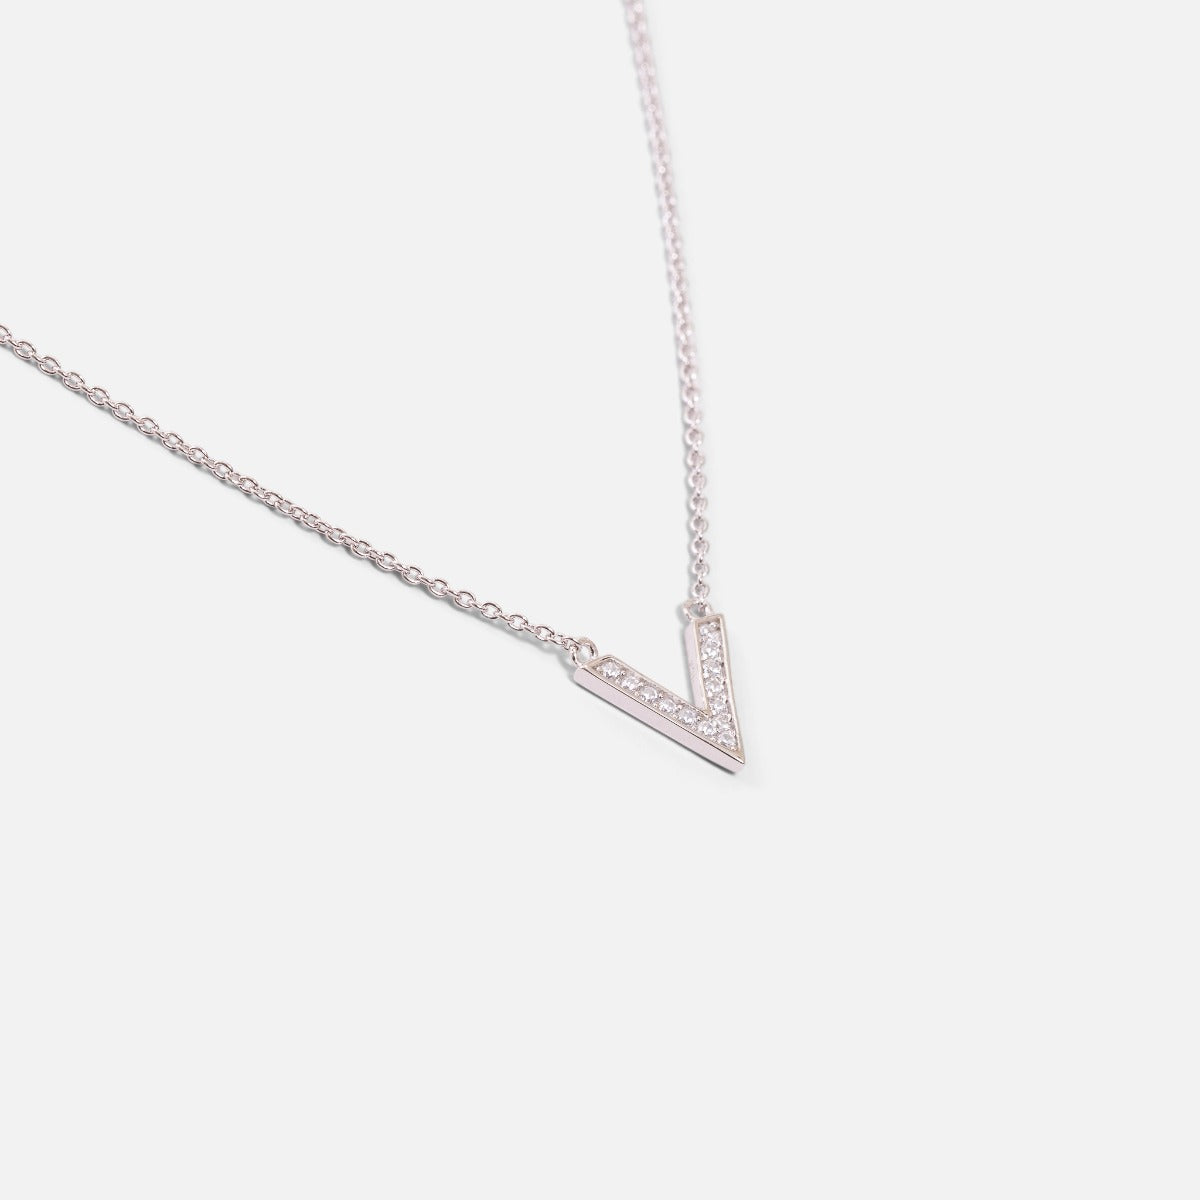 Thin sterling silver chain necklace and ‘’v’’ shaped cubic zirconia pendant